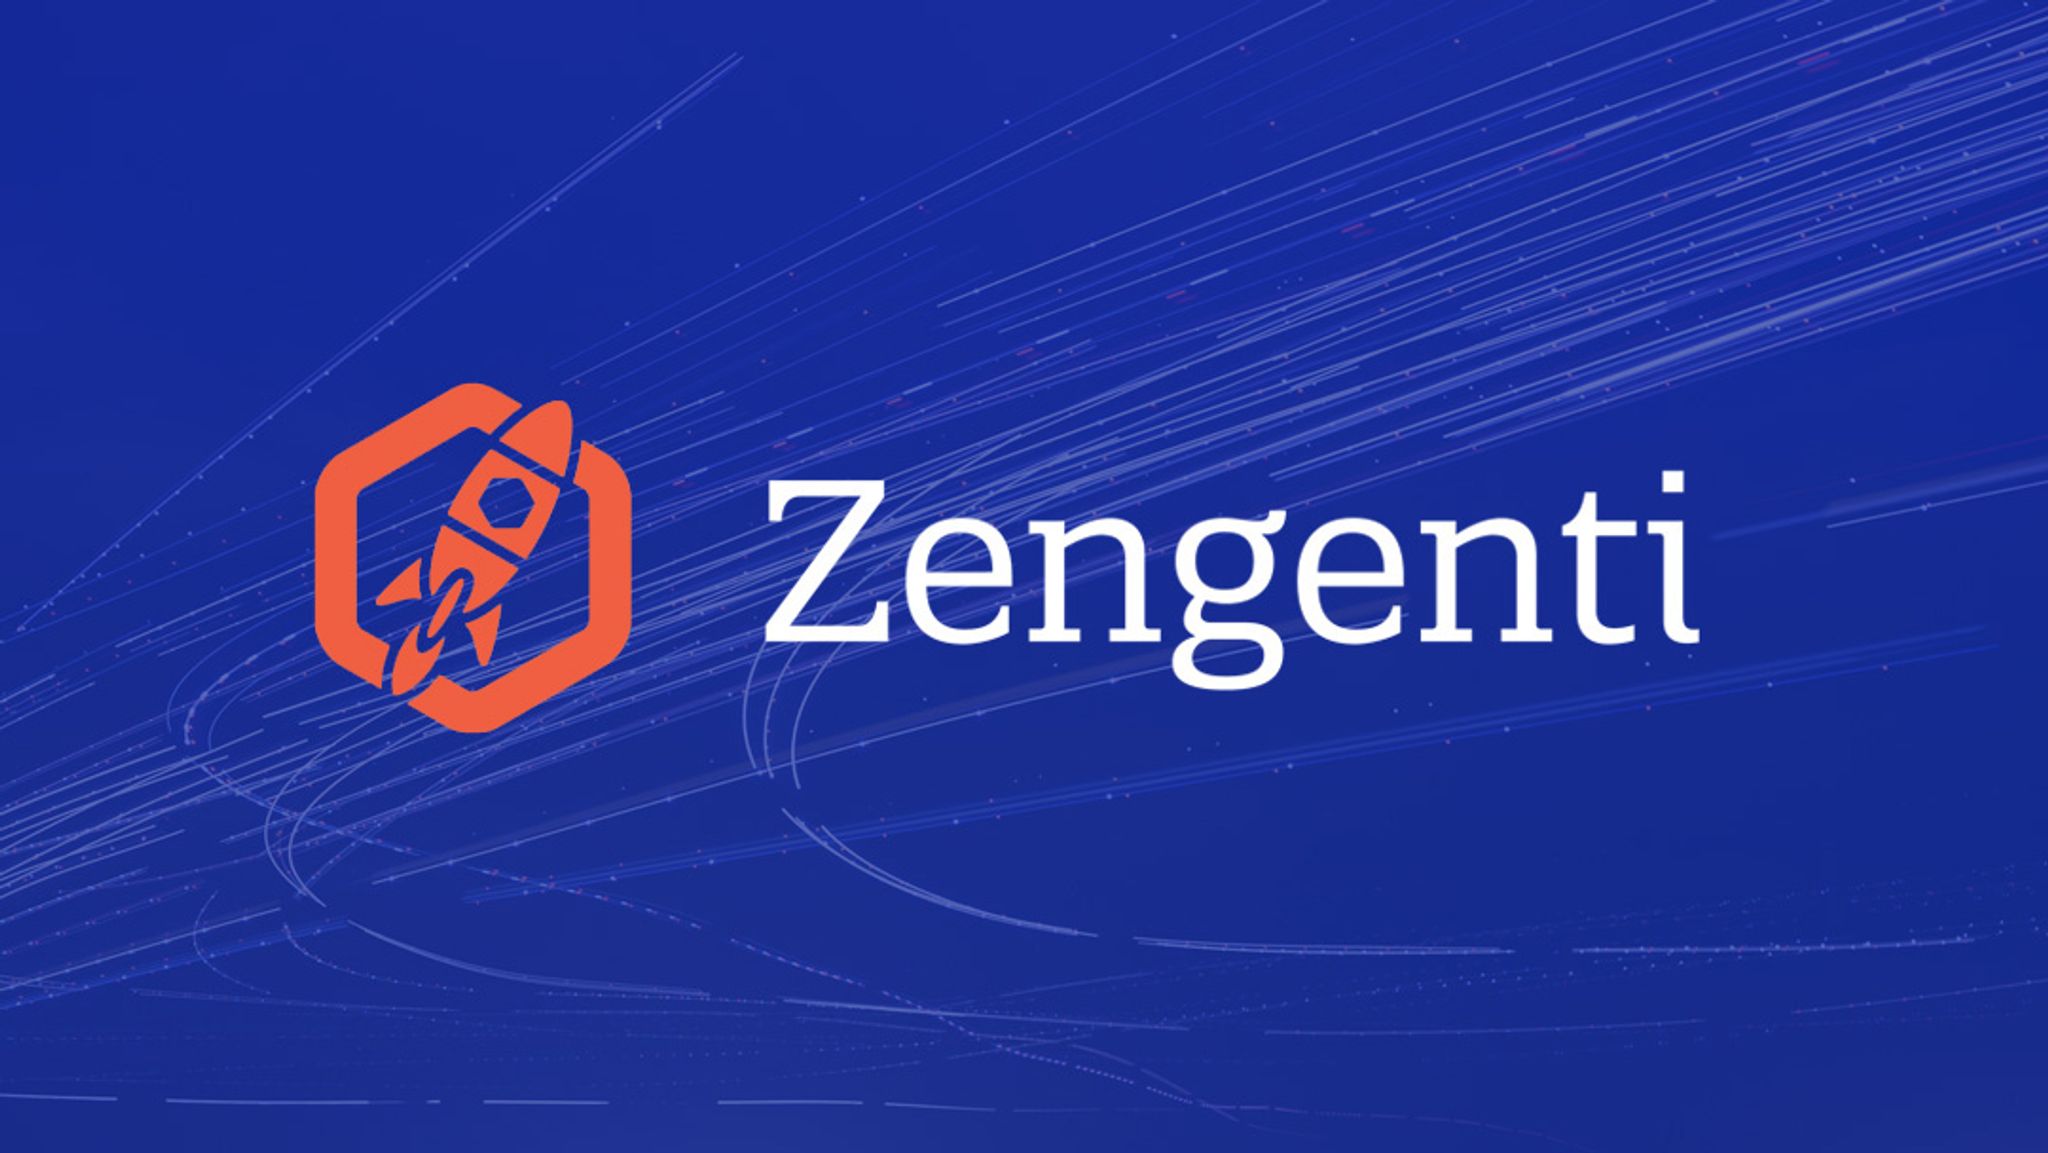 Zengenti logo against a background with contrails from jets